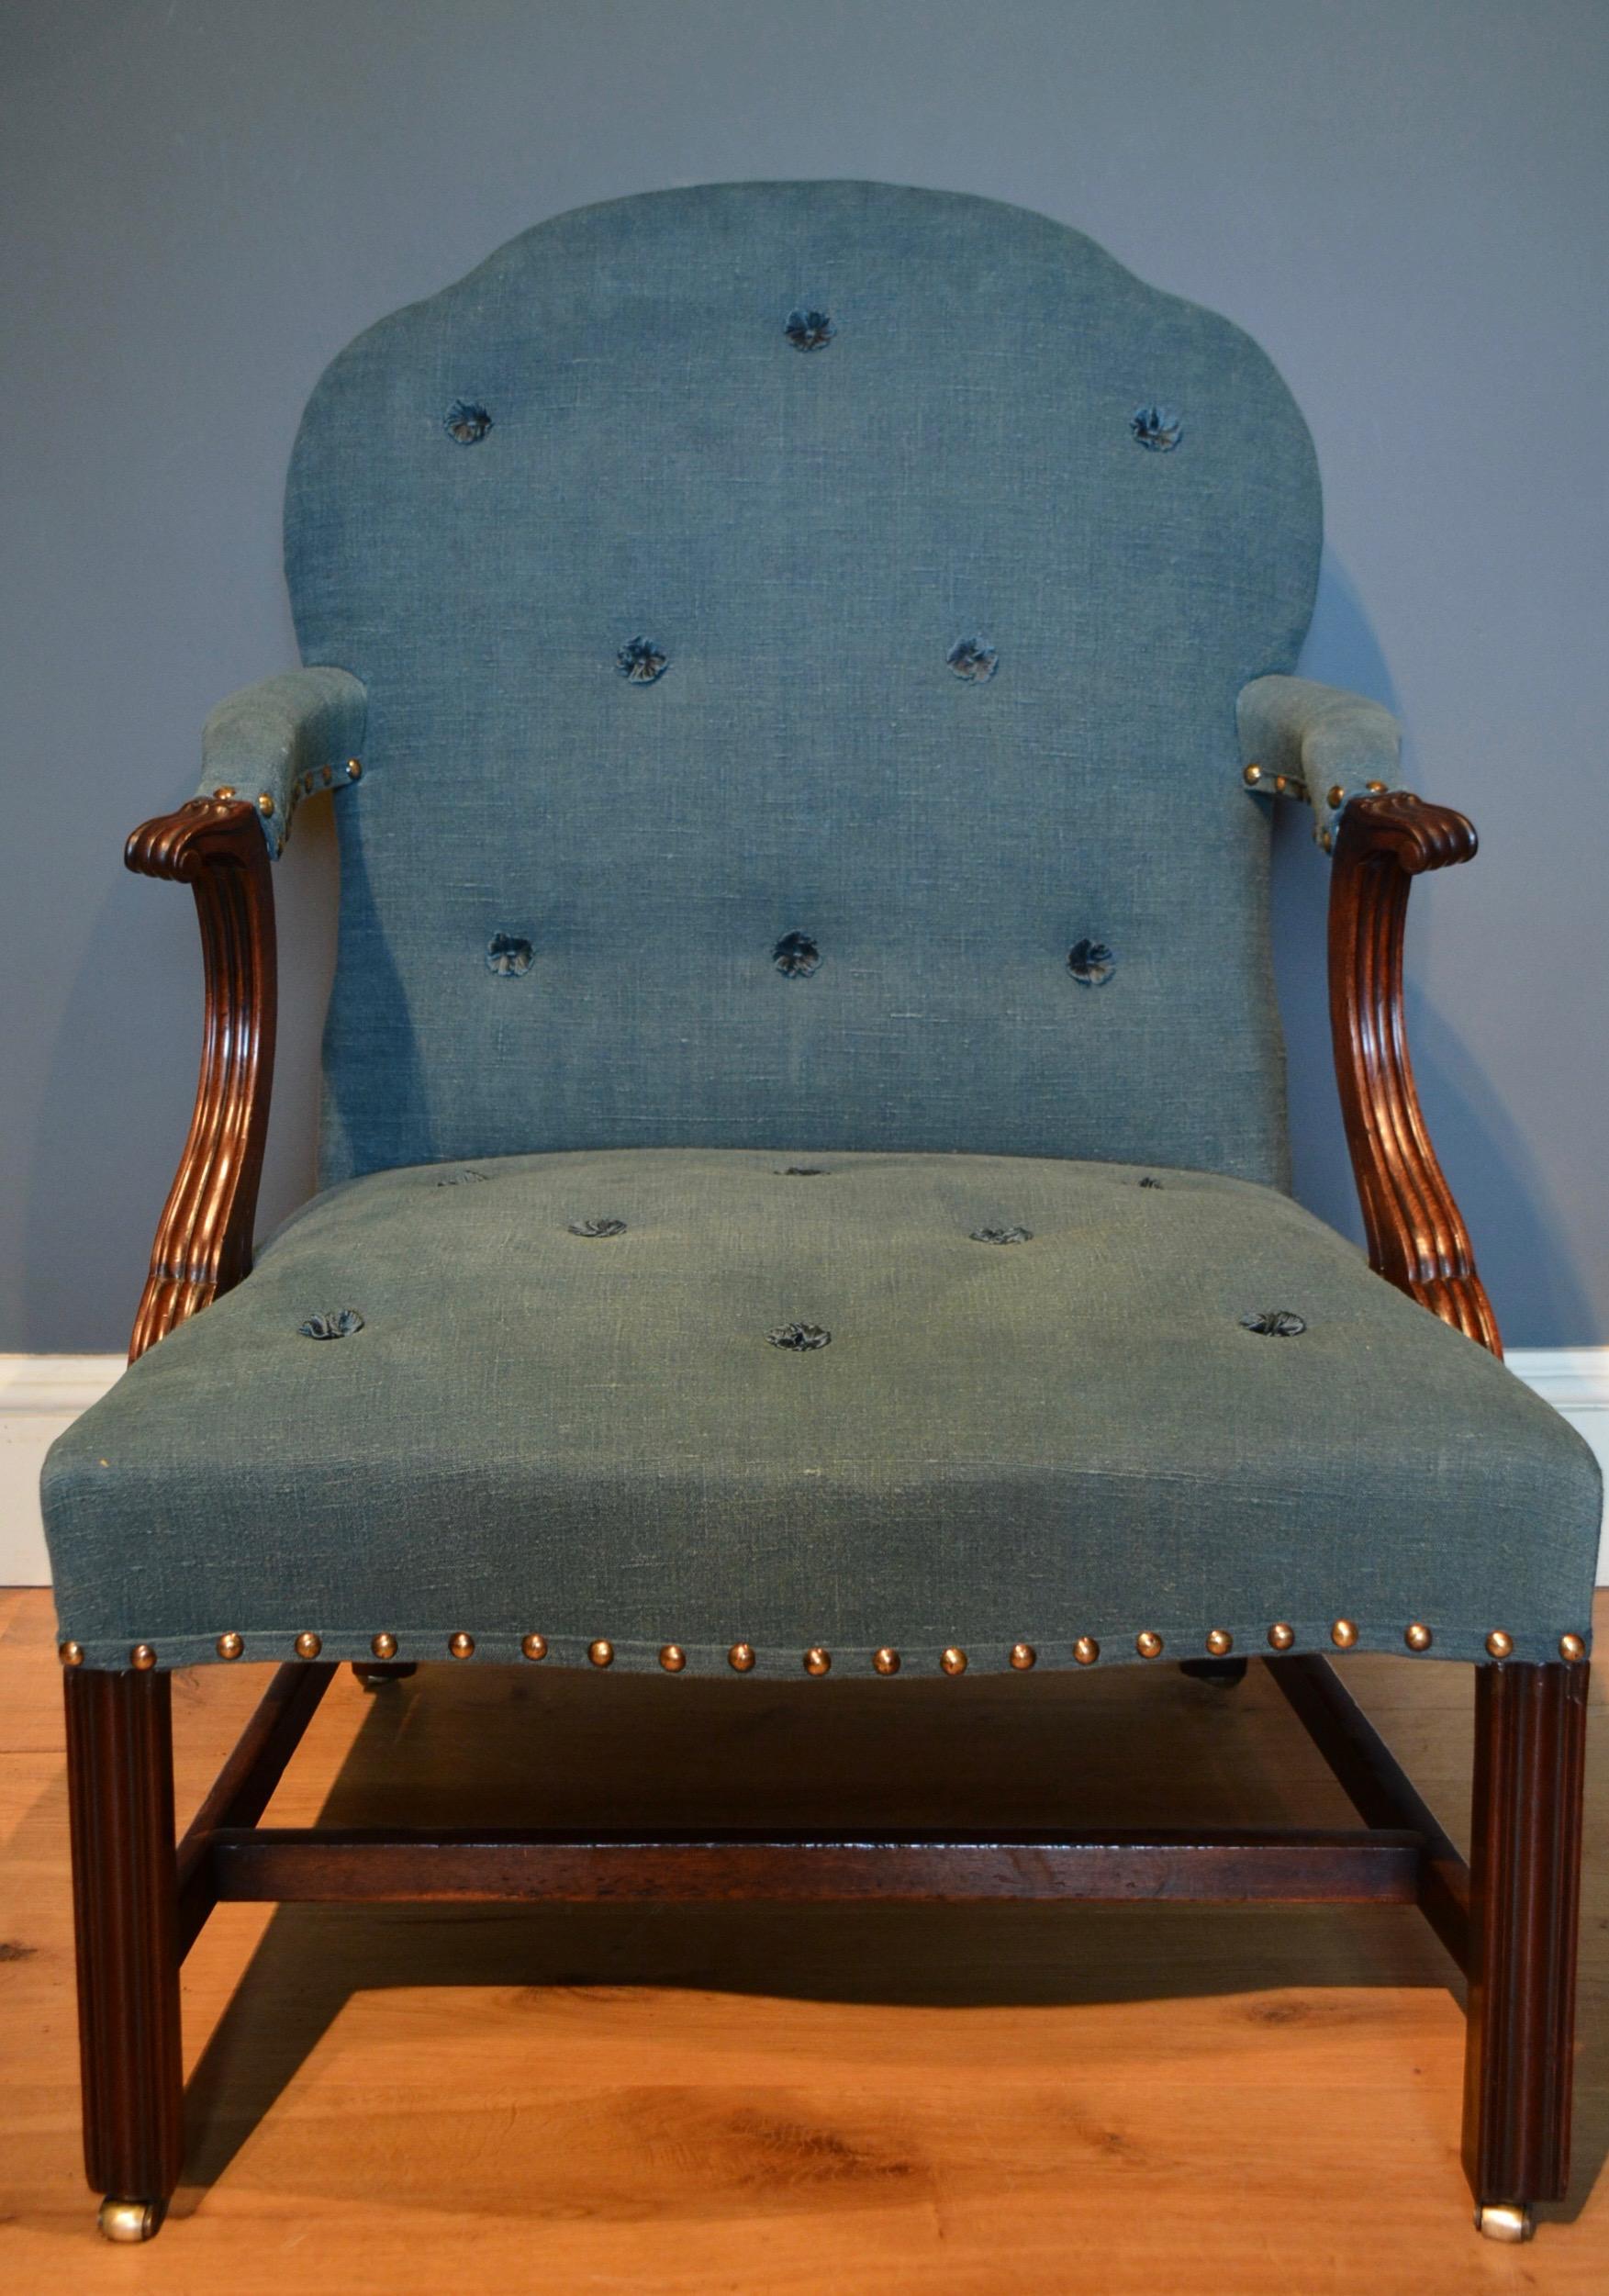 A George III mahogany Gainsborough chair, the shaped upholstered back and seat with reeded and paneled scroll arms standing on molded front legs.